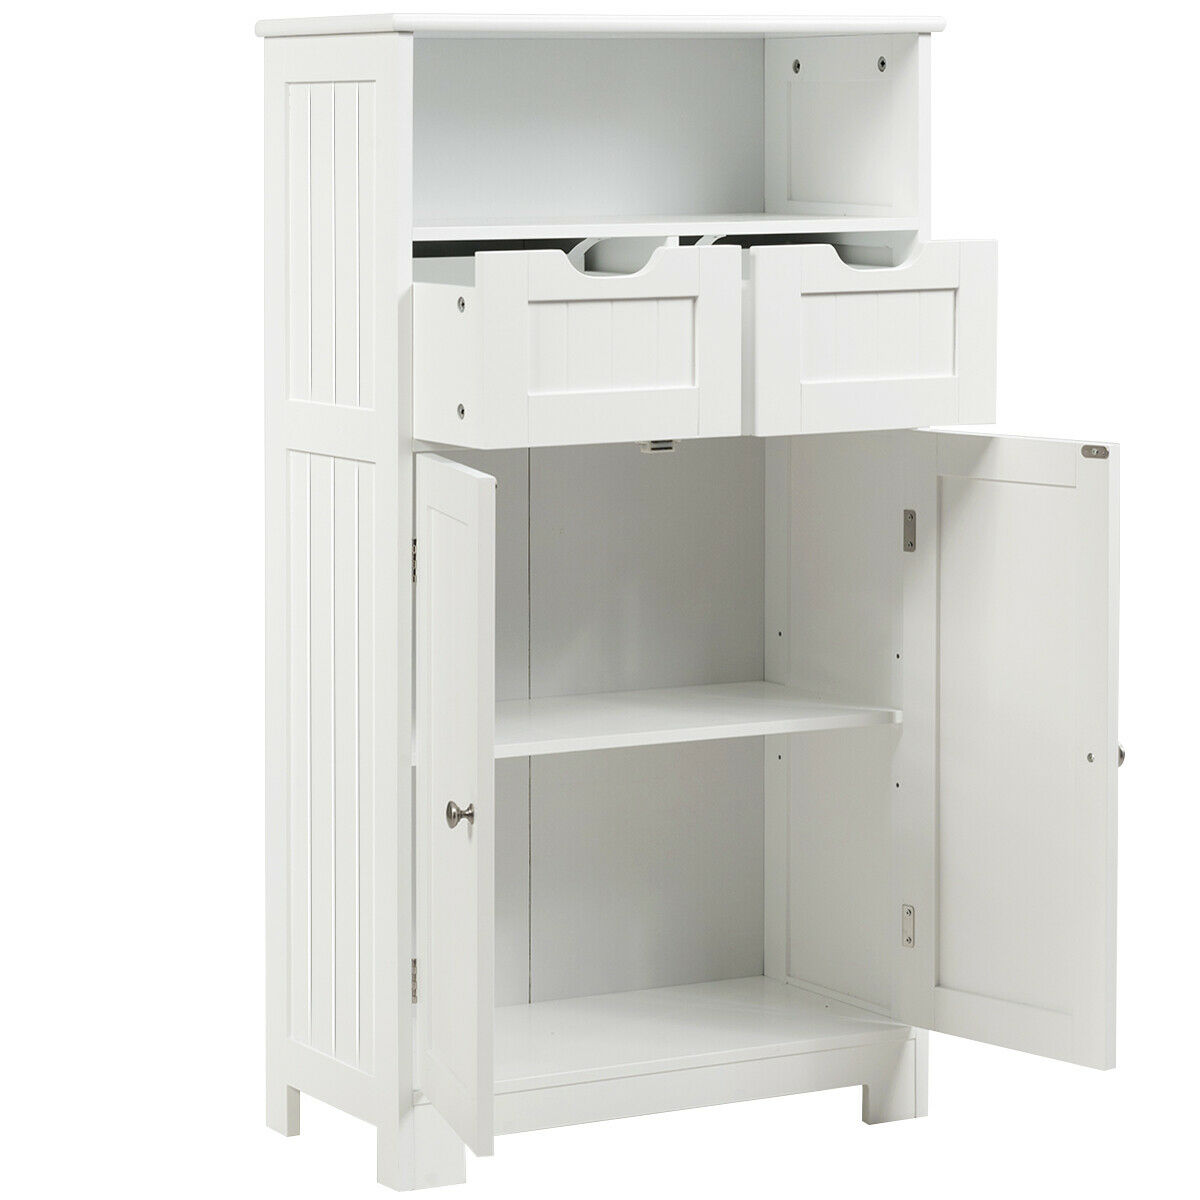 Floor Standing Utility Cabinet with Adjustable Drawers